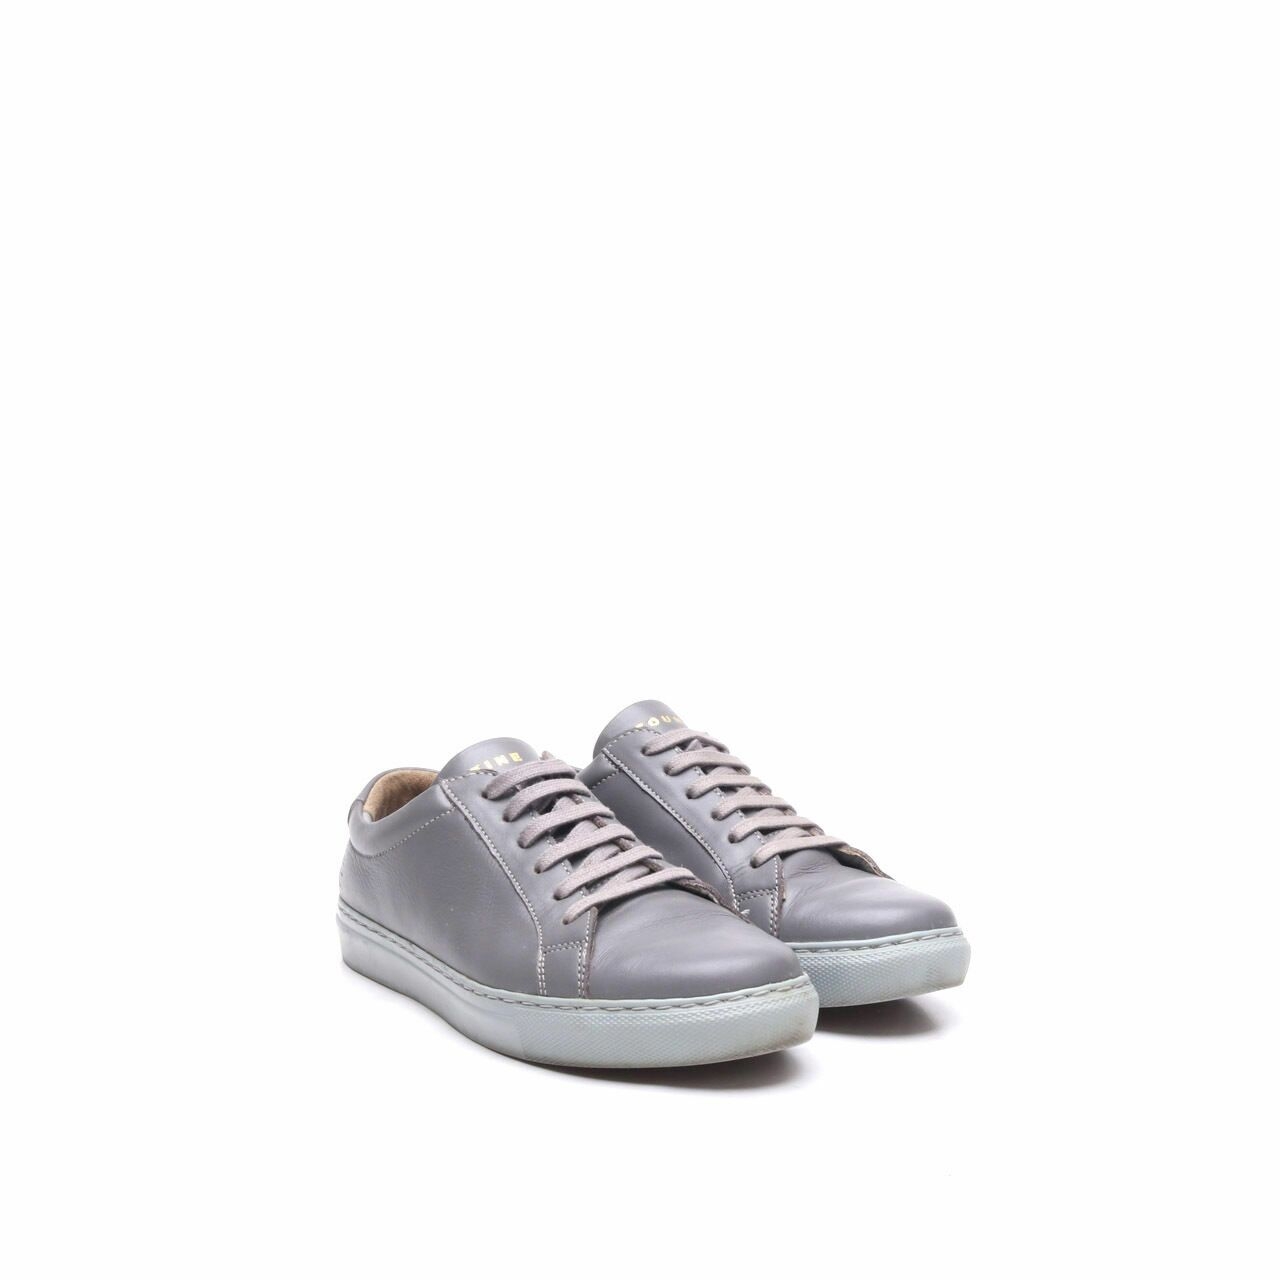 Fine Counsel Grey Sneakers